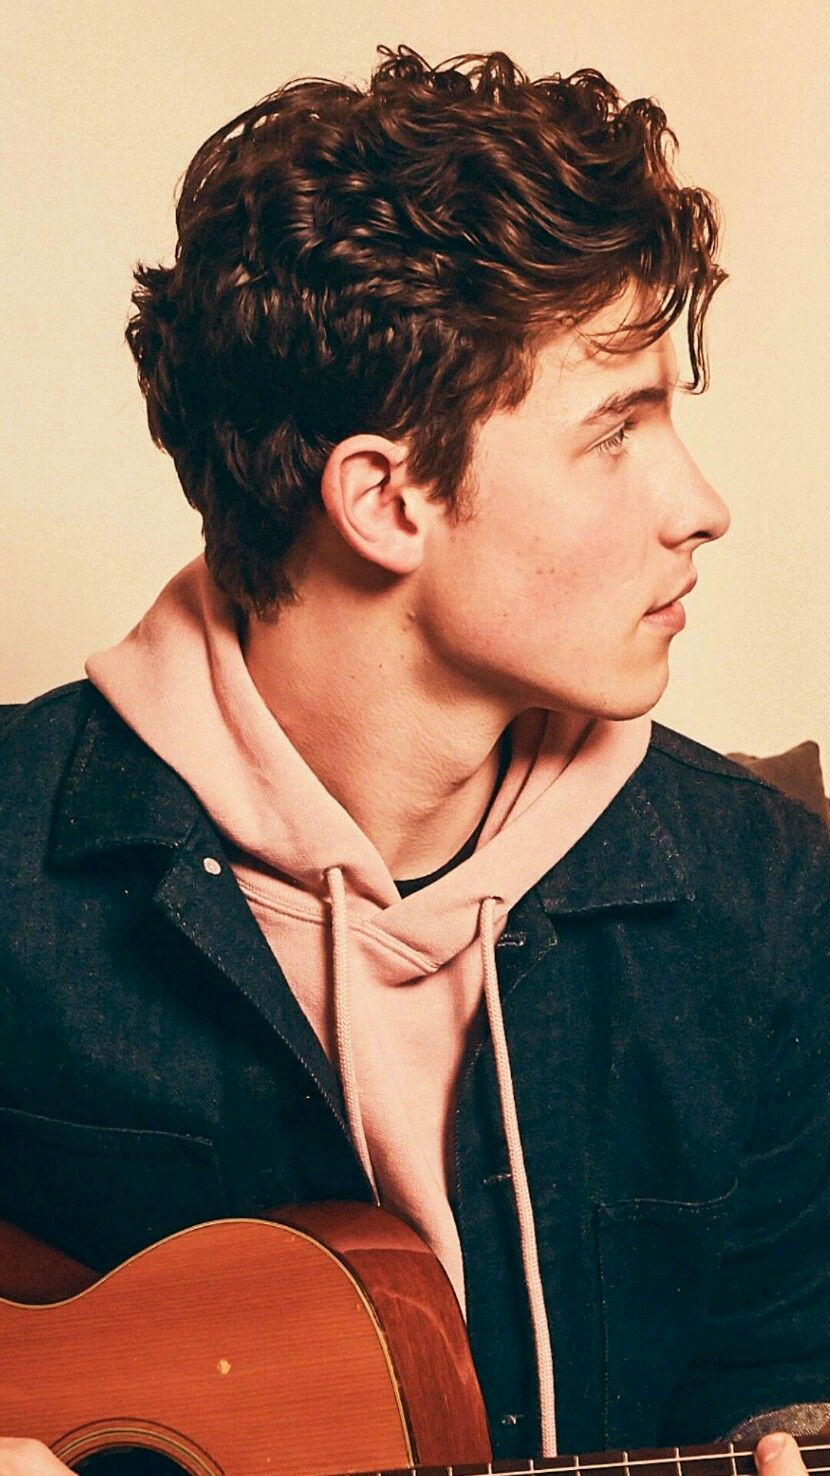 Shawn Mendes Wallpaper In